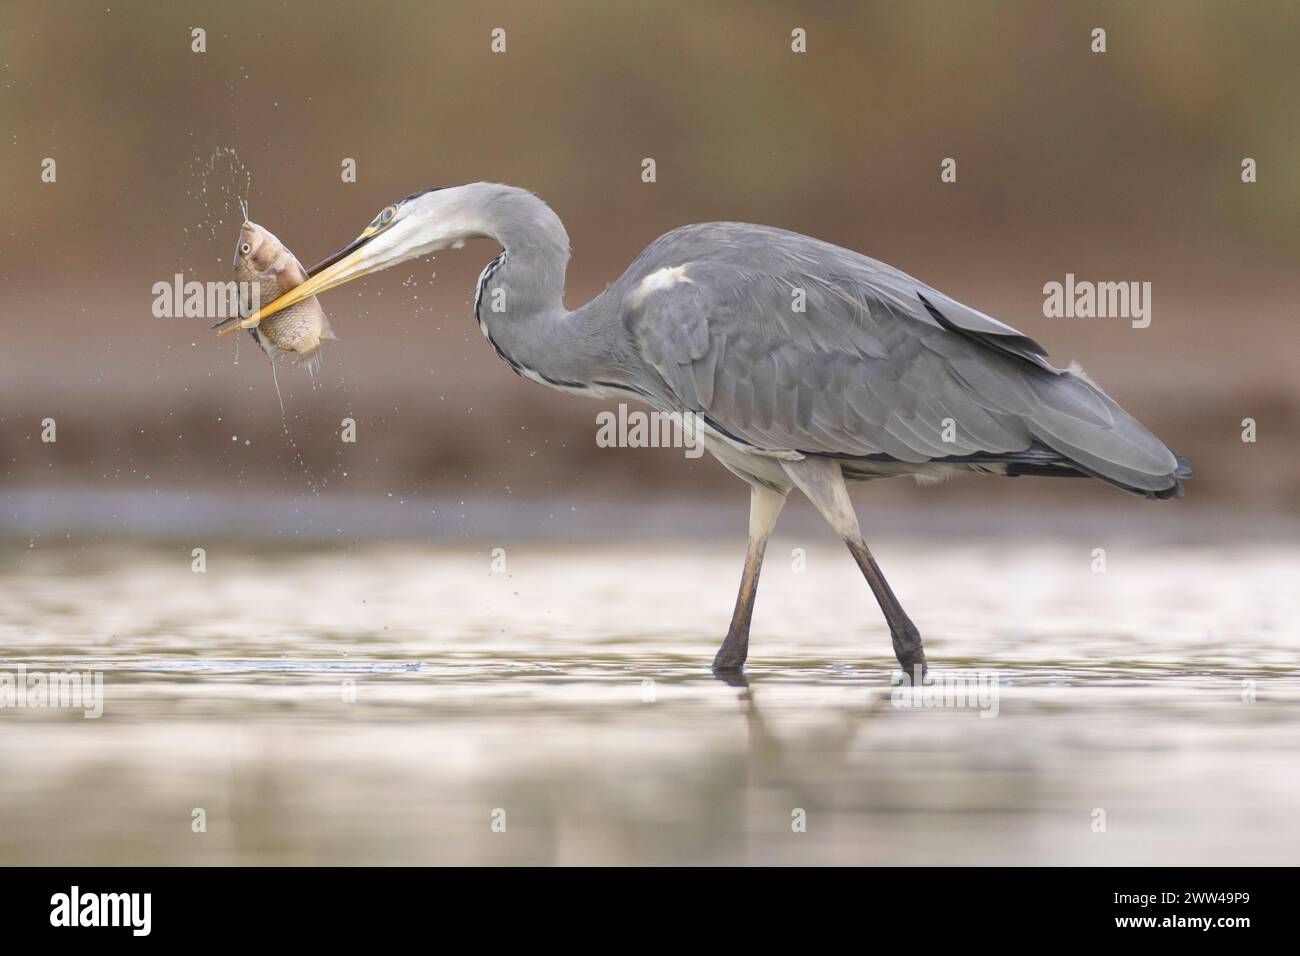 Grey heron (Ardea cinerea) fishing in a water pond. This large bird hunts in lakes, rivers and marshes, catching fish or small animals with a darting Stock Photo